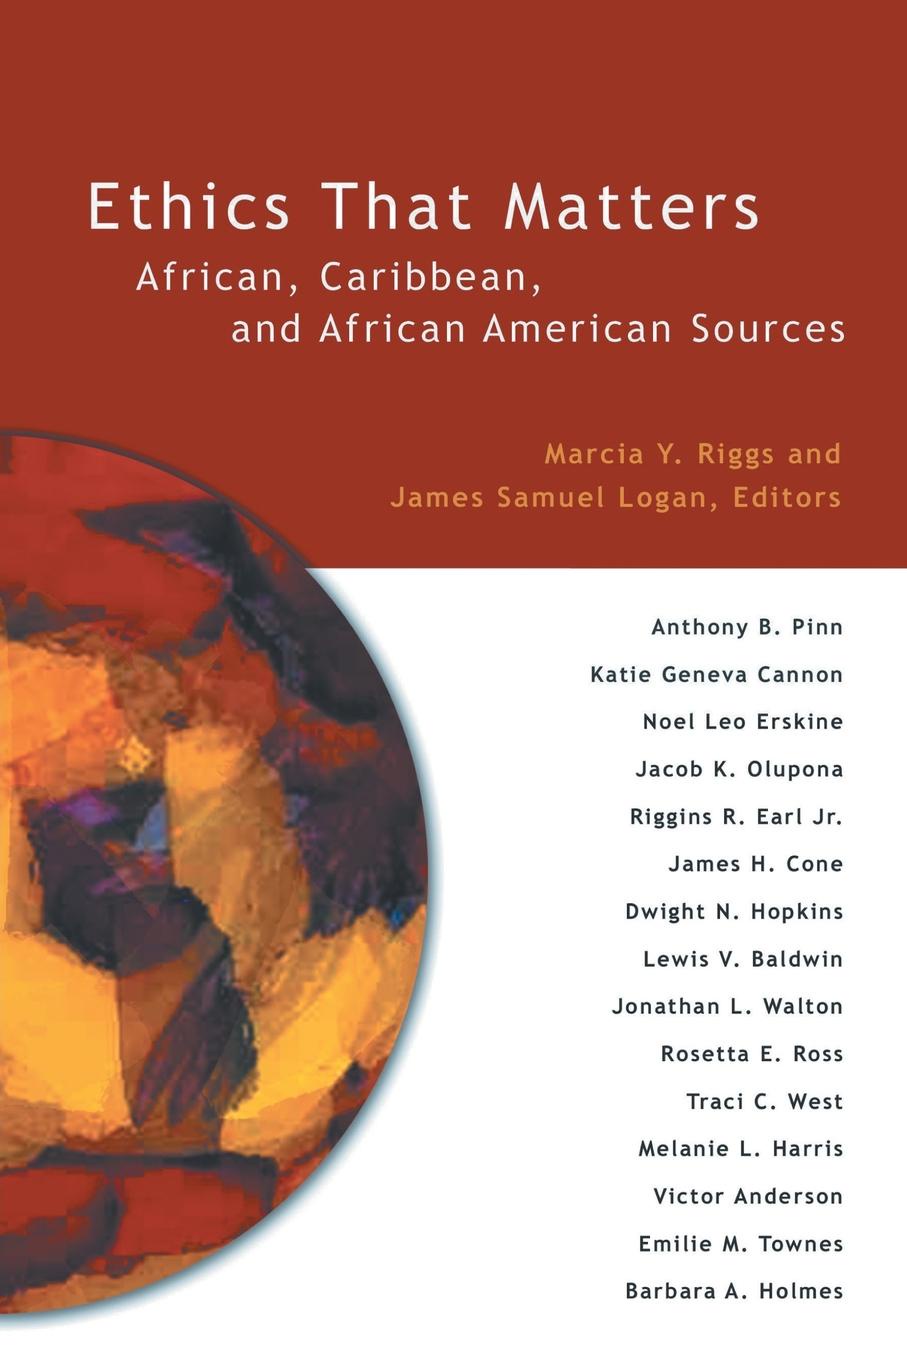 Ethics That Matters. African, Caribbean, and African American Sources